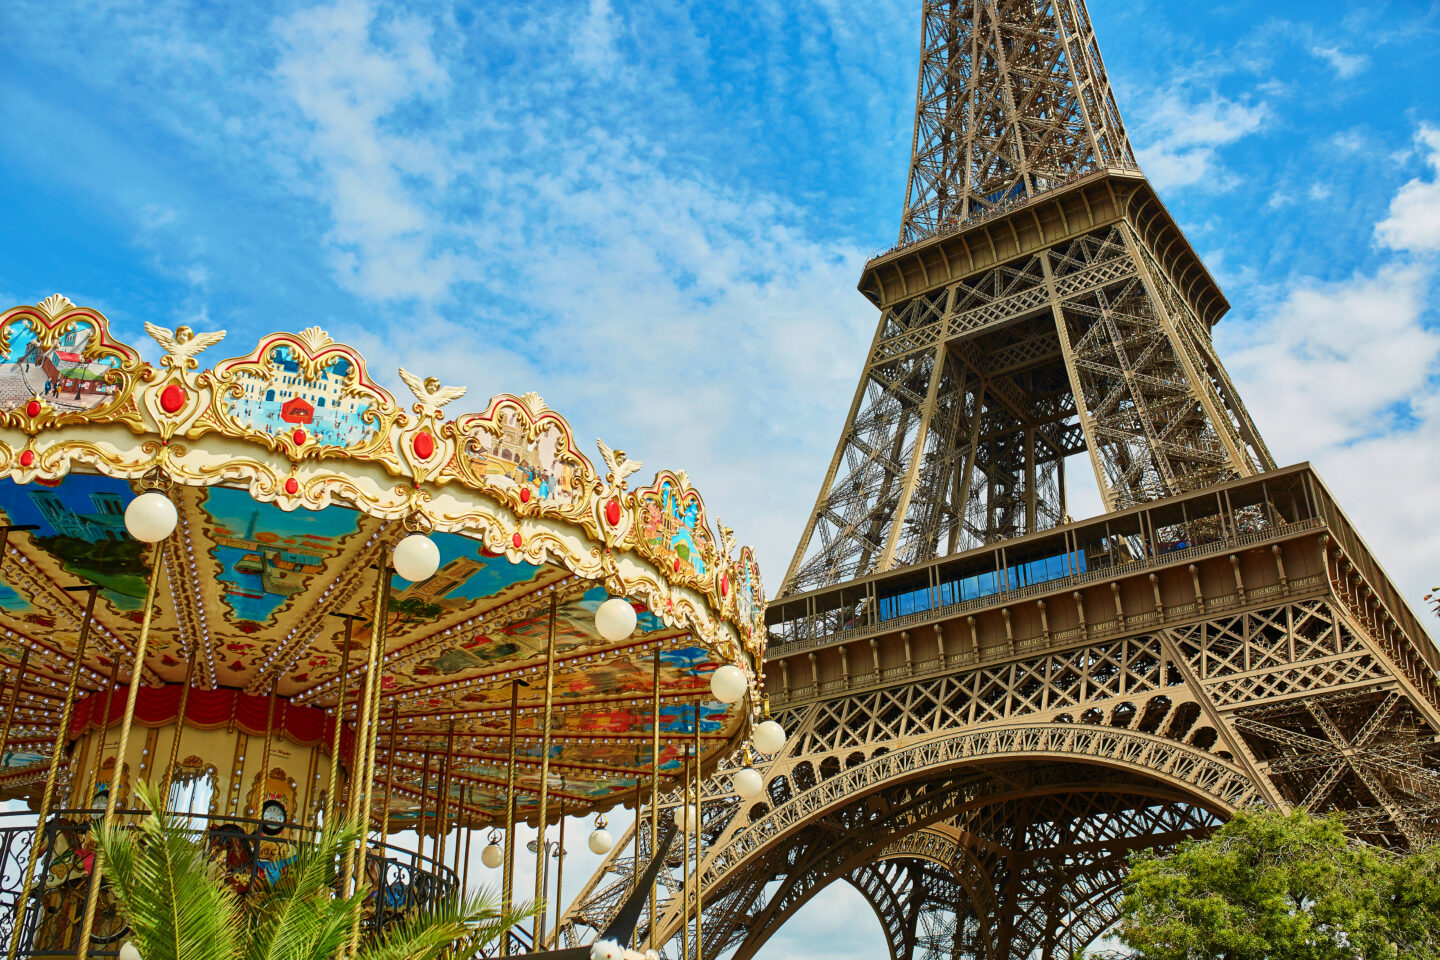 Most Instagrammable Close Shots of The Eiffel Tower: Eiffel tower and traditional French merry-go-round